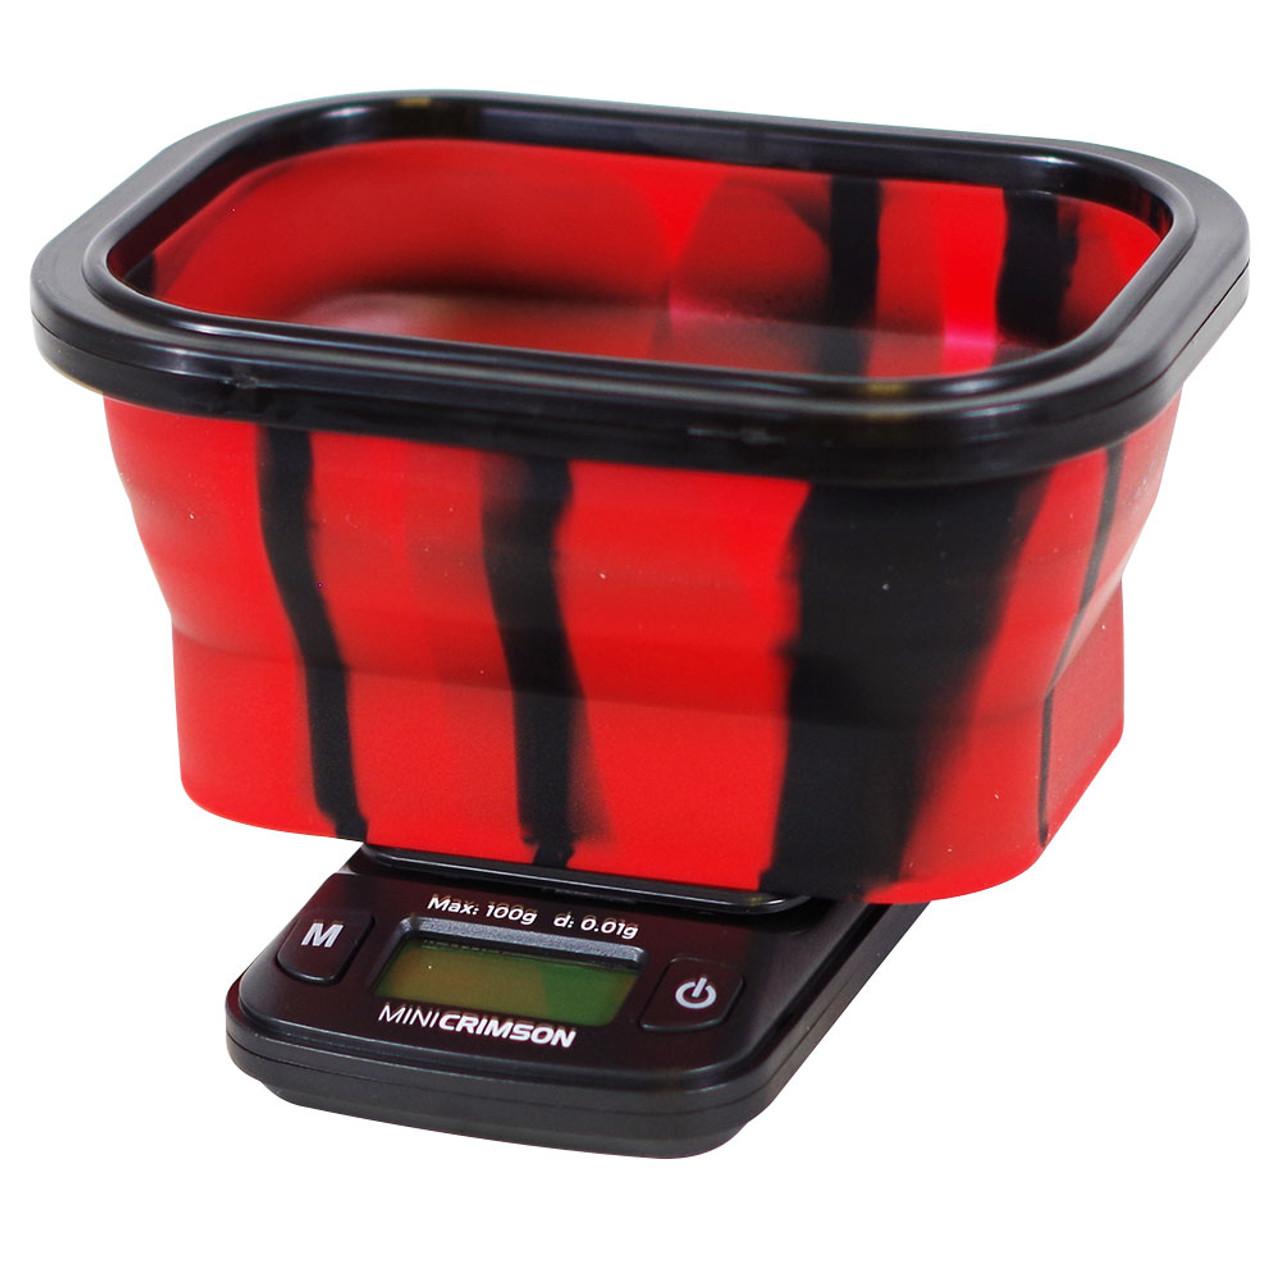 CRIMSON Collapsible Bowl Scale 1000g x 0.1g Black (Bowl: Red) 